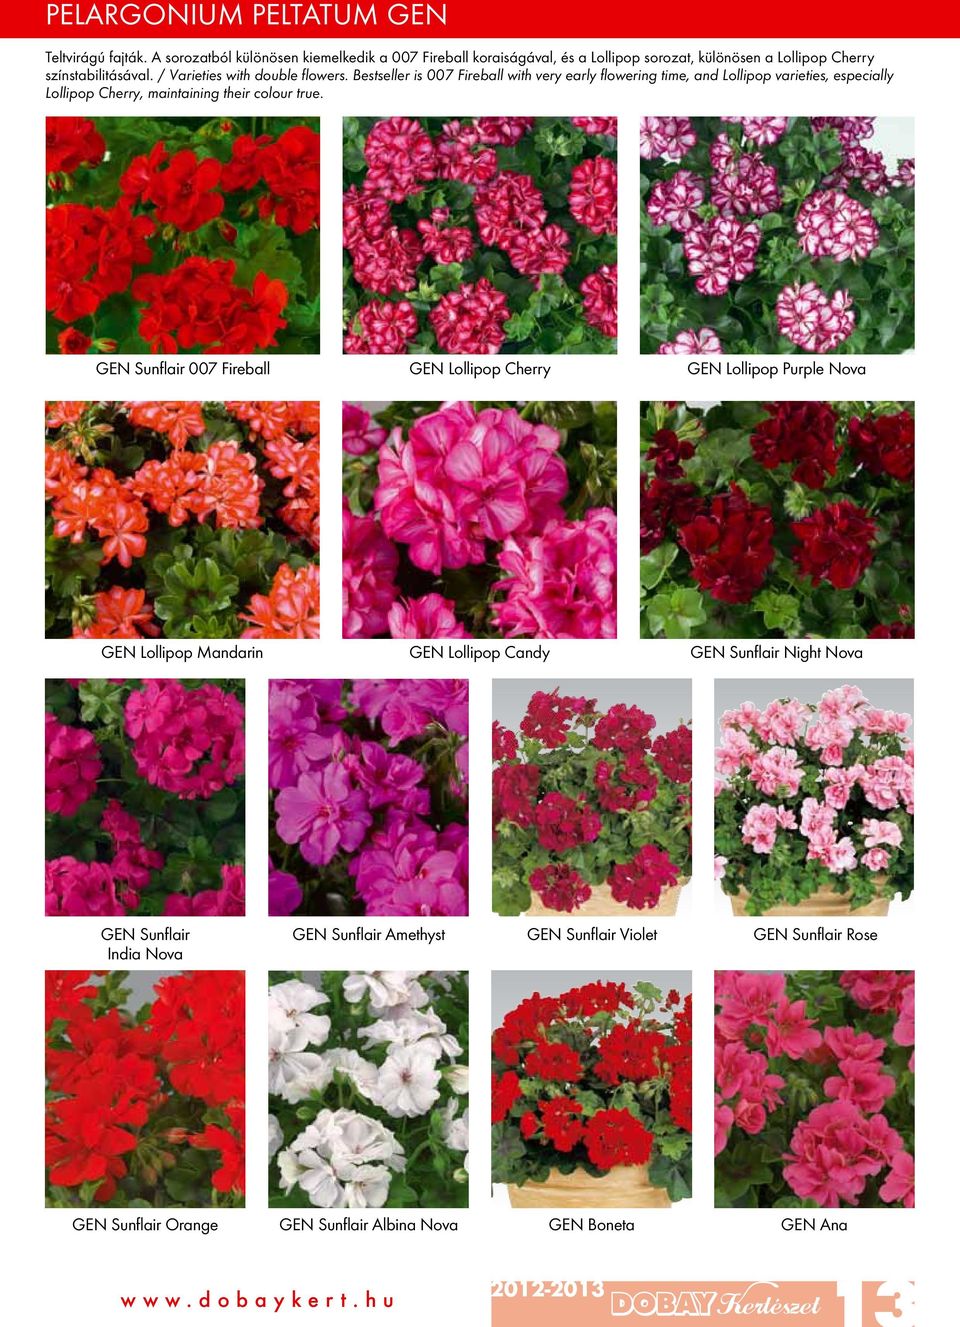 / Varieties with double flowers.